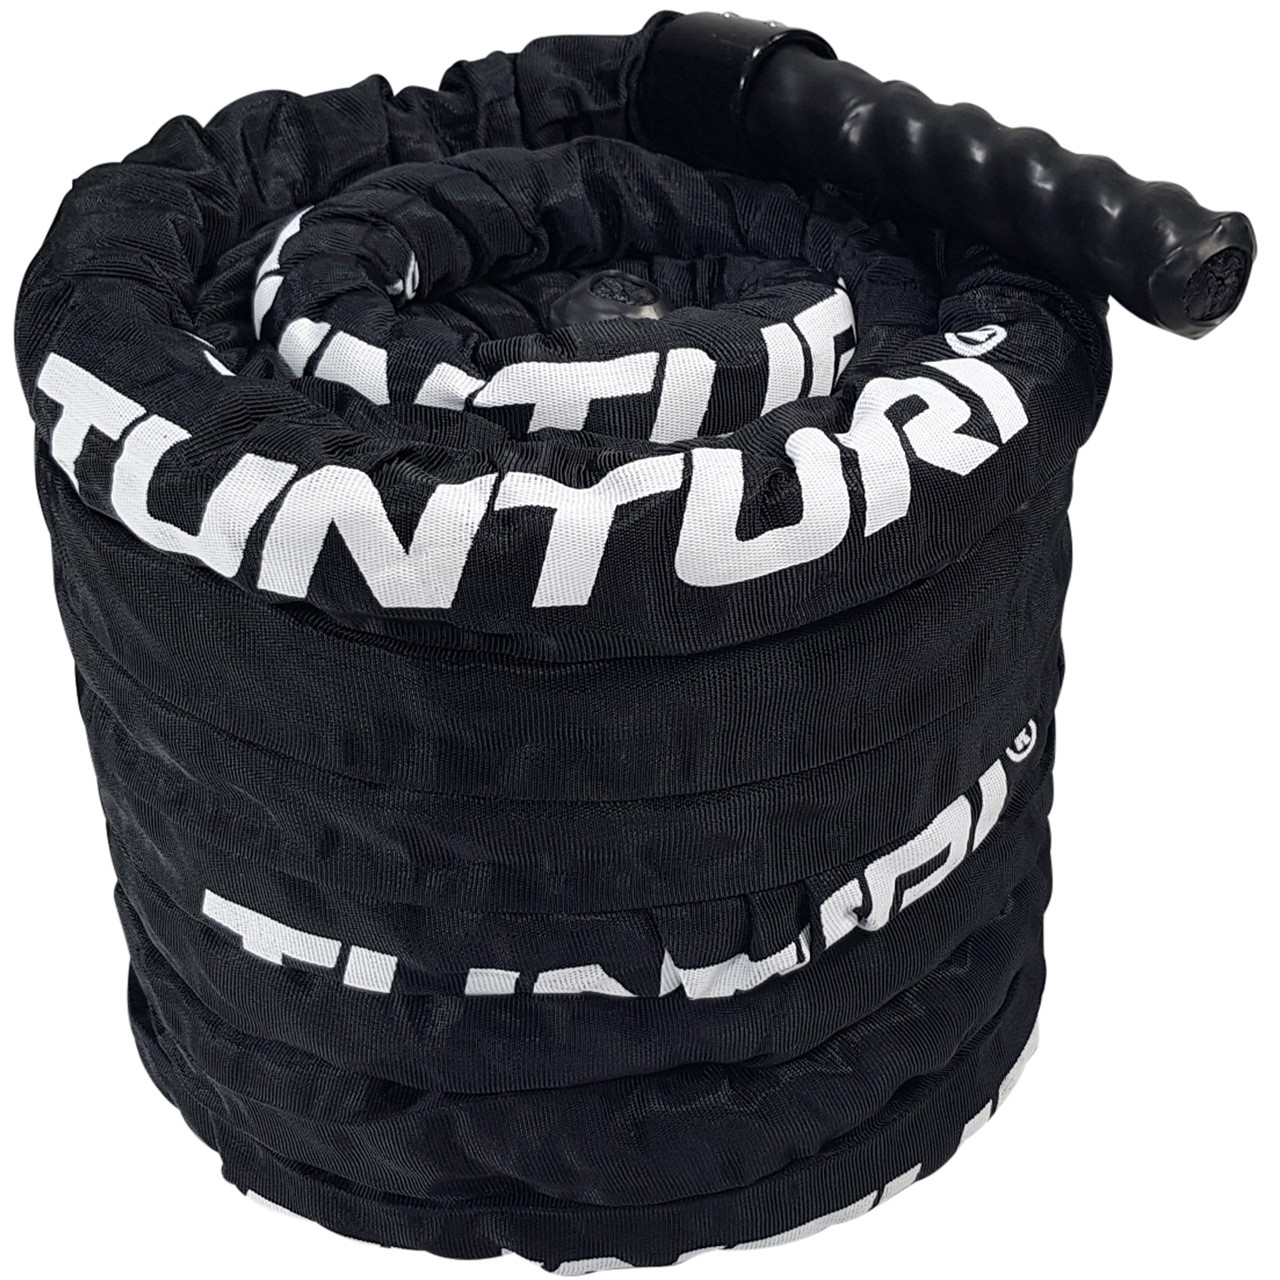 Tunturi Pro Battle Rope with Protective Cover 10 m